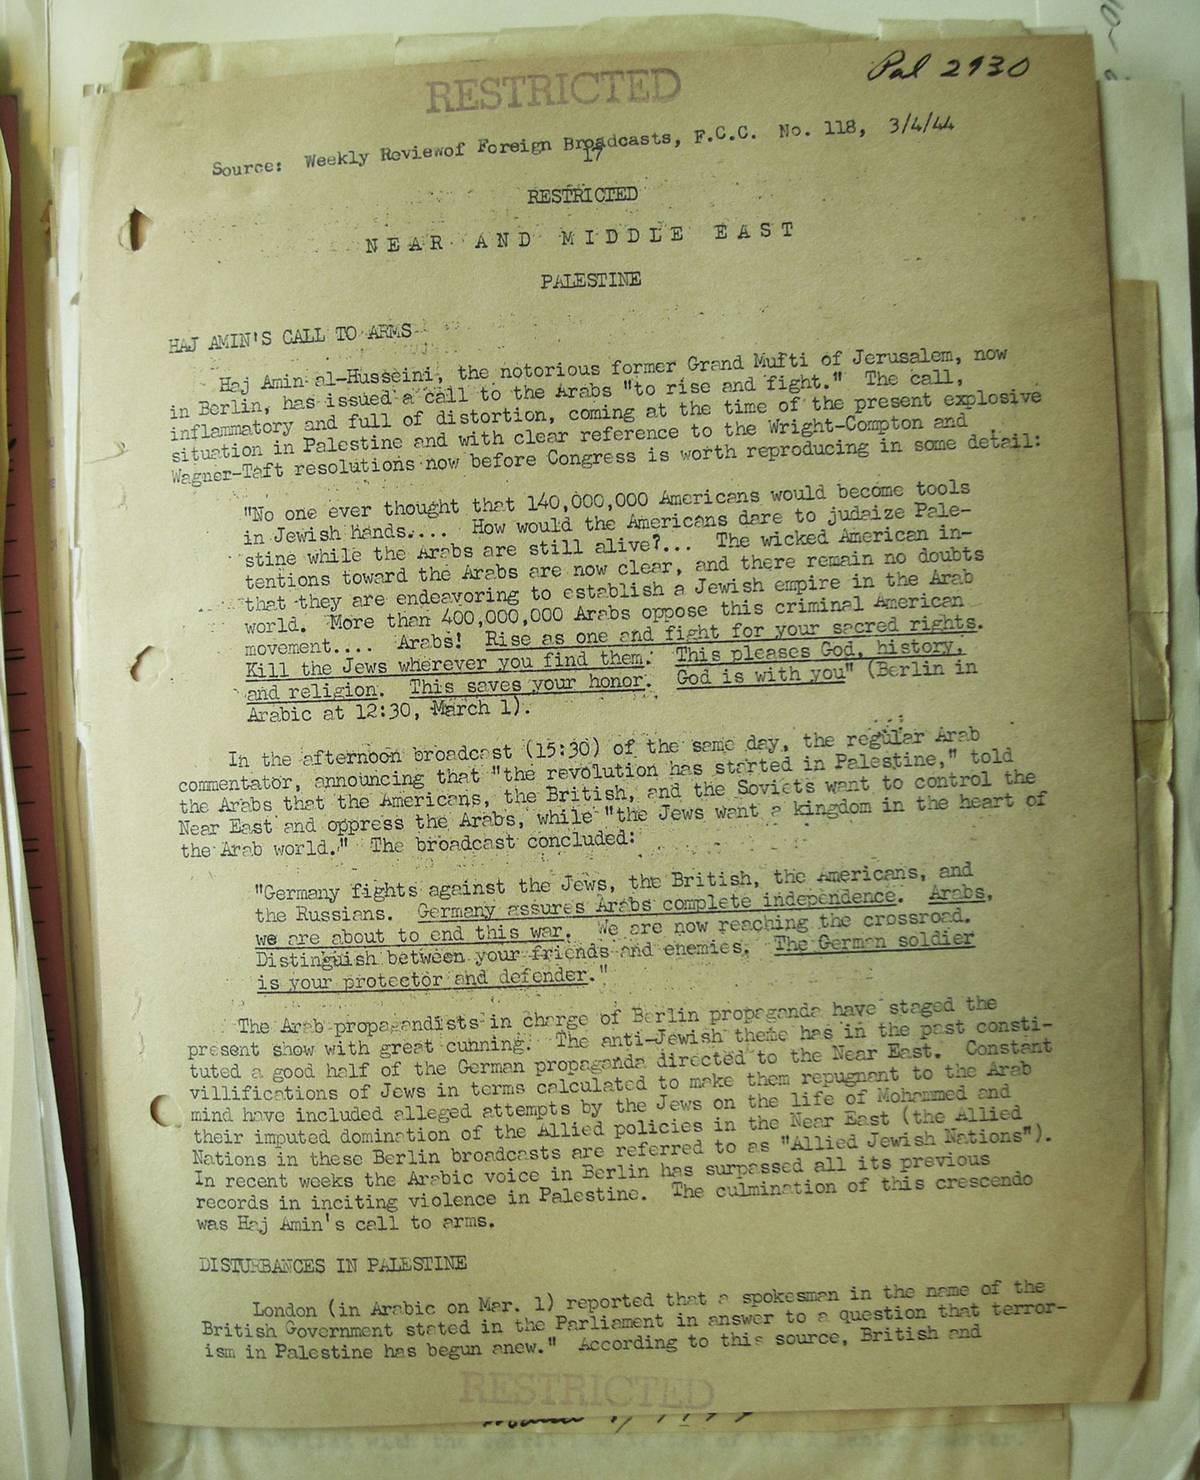 Transcript of a broadcast made by Amin el-Husseini on March 1, 1944